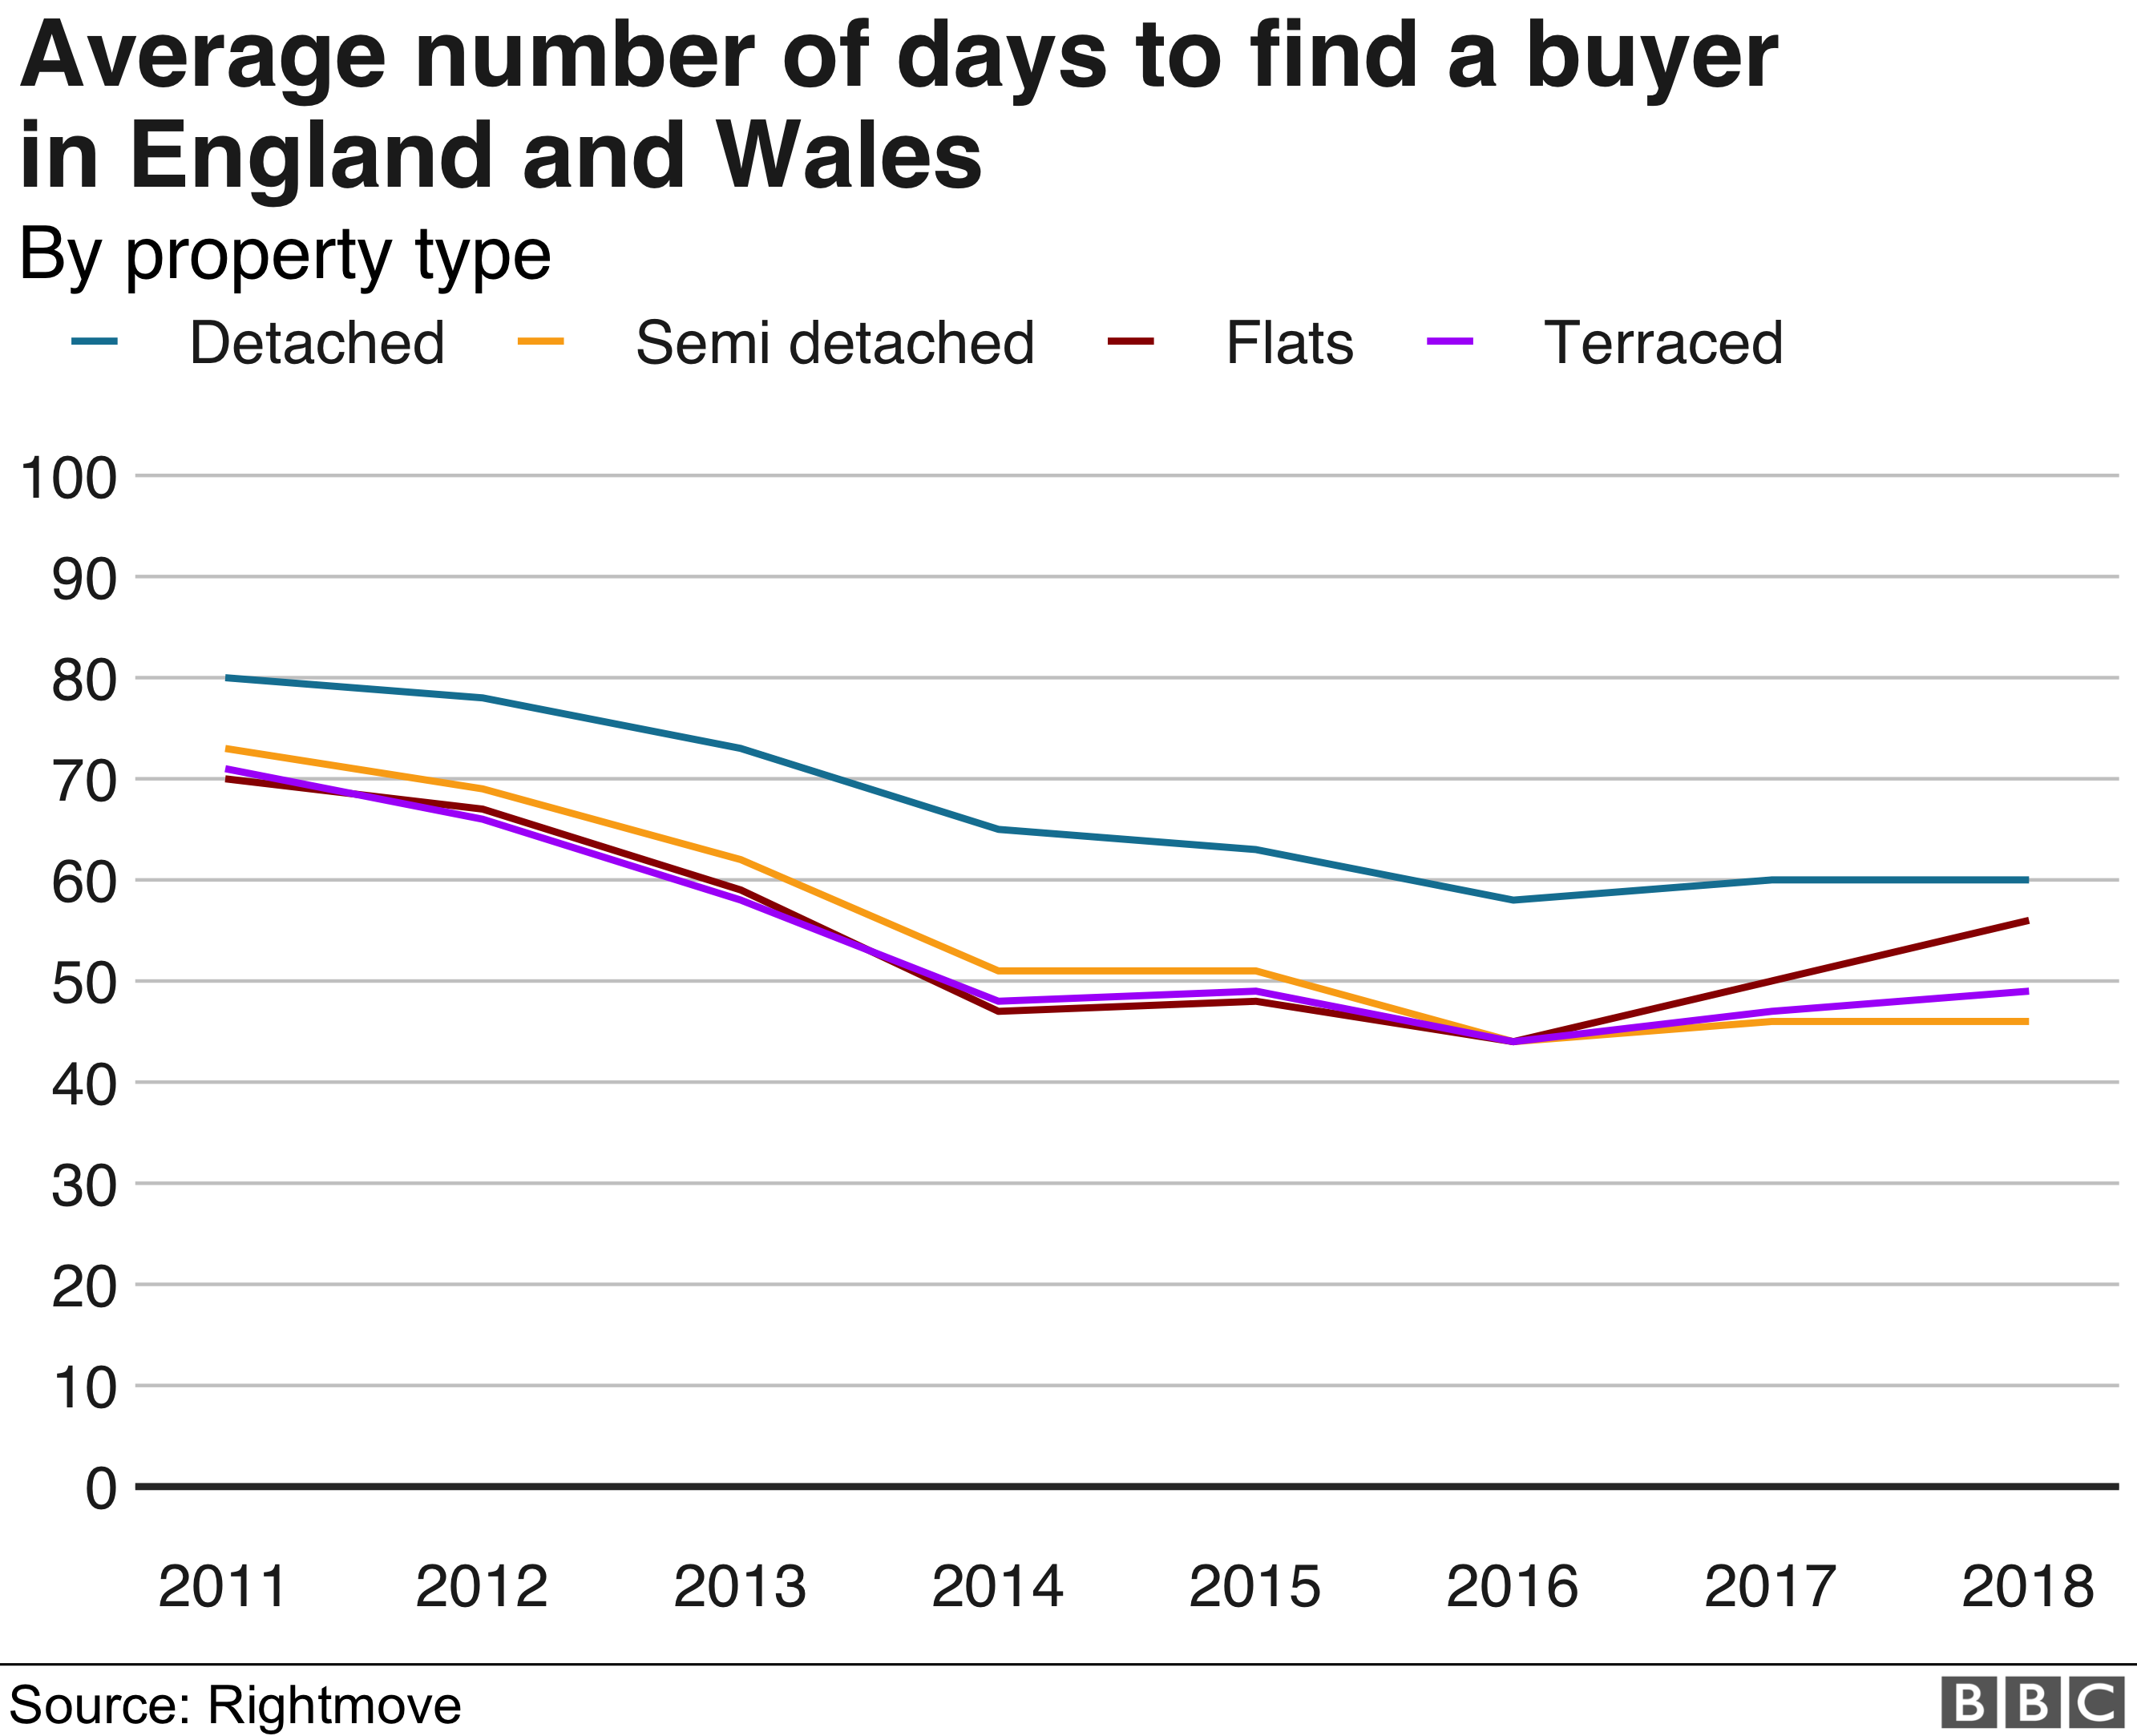 Average number of day to find a buyer in England and Wales by property type graph